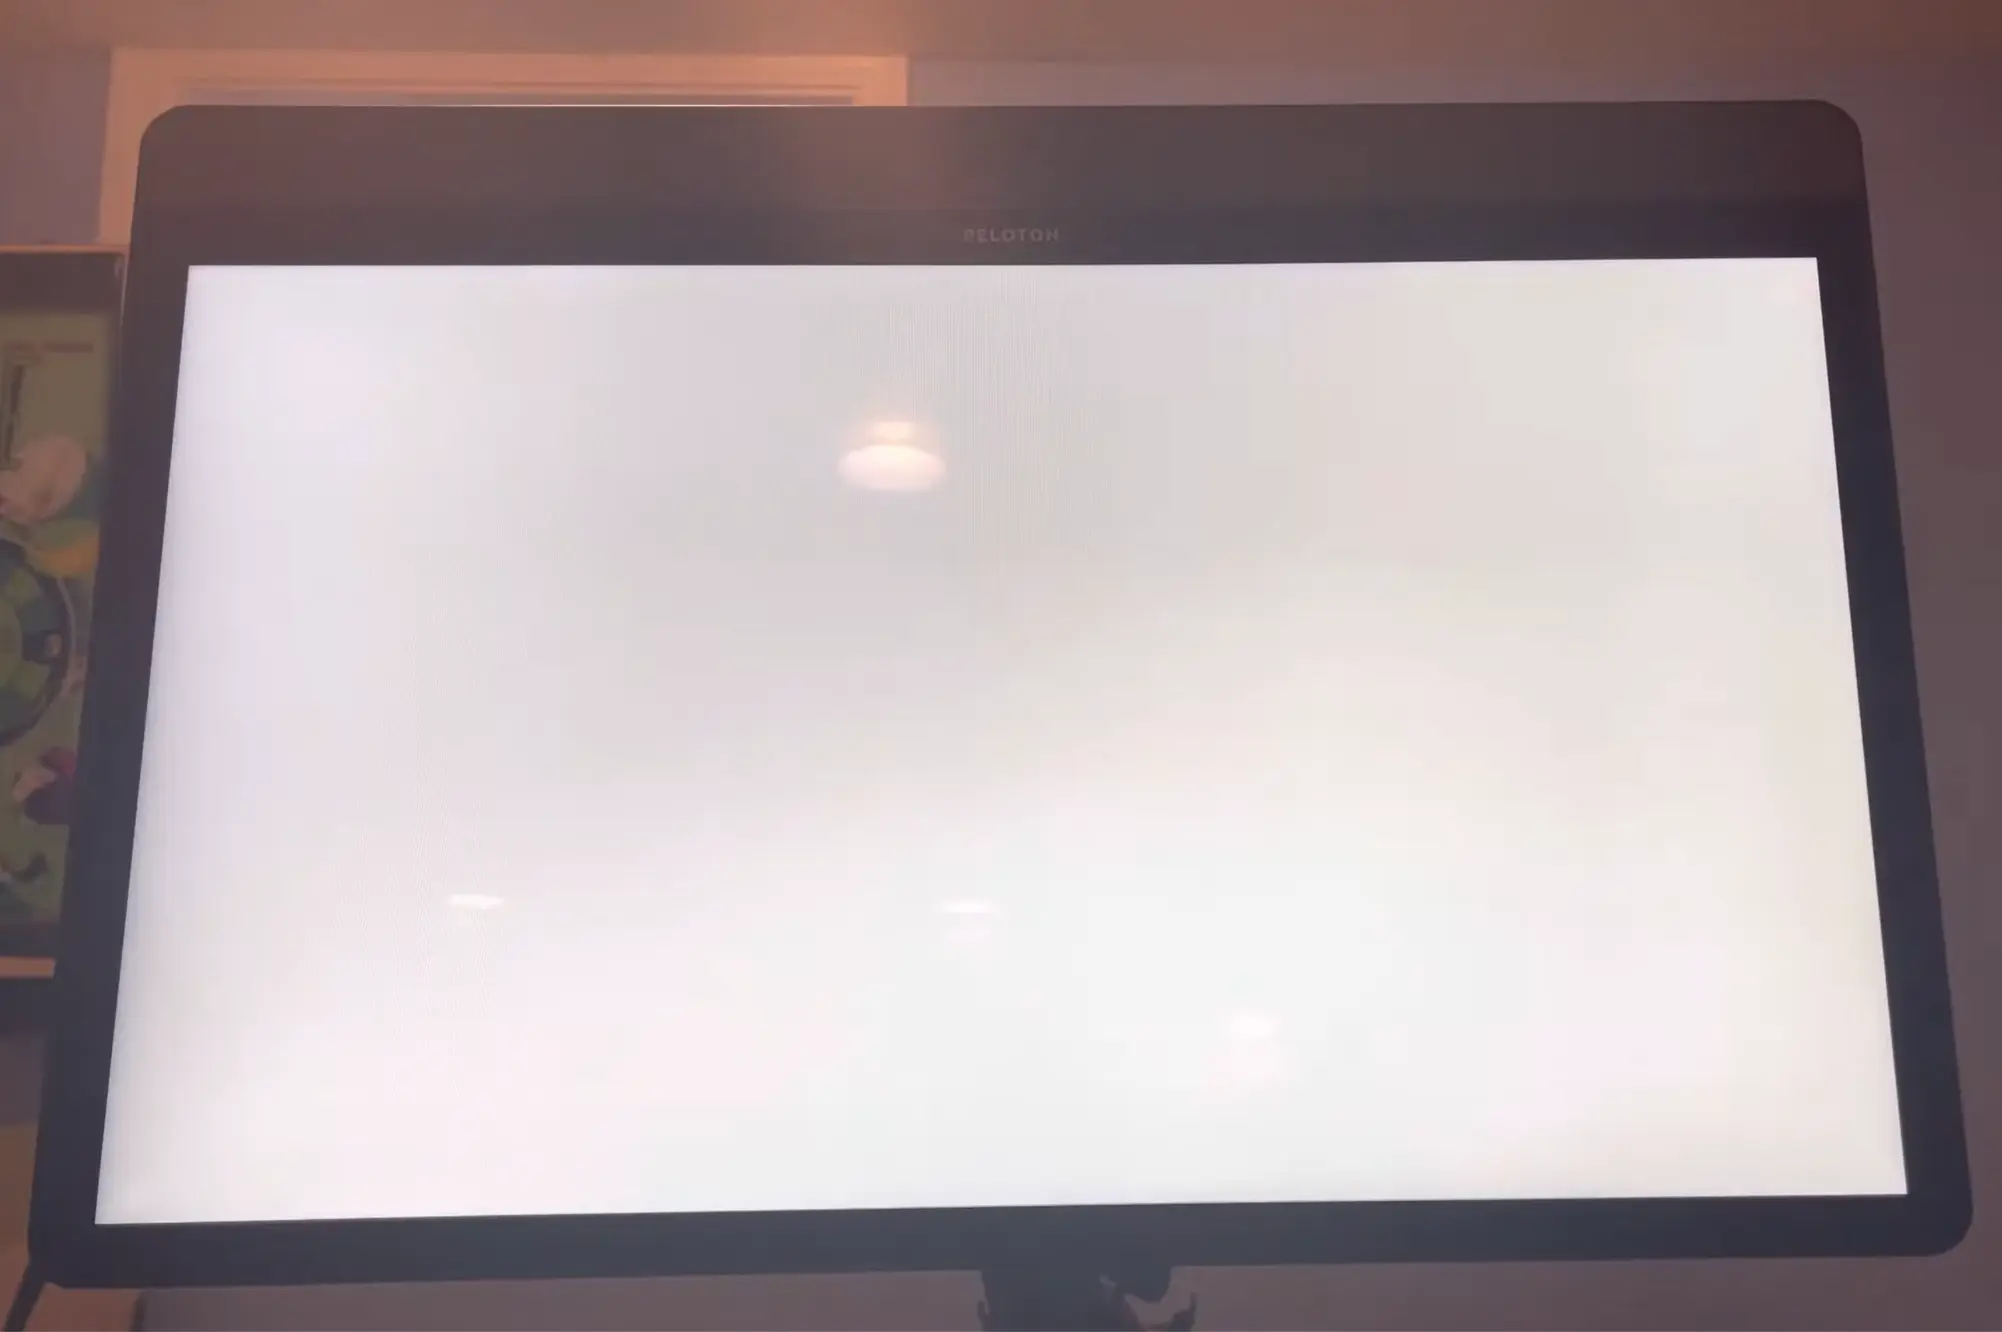 How Do I Fix The White Screen That Keeps Flashing on The Peloton